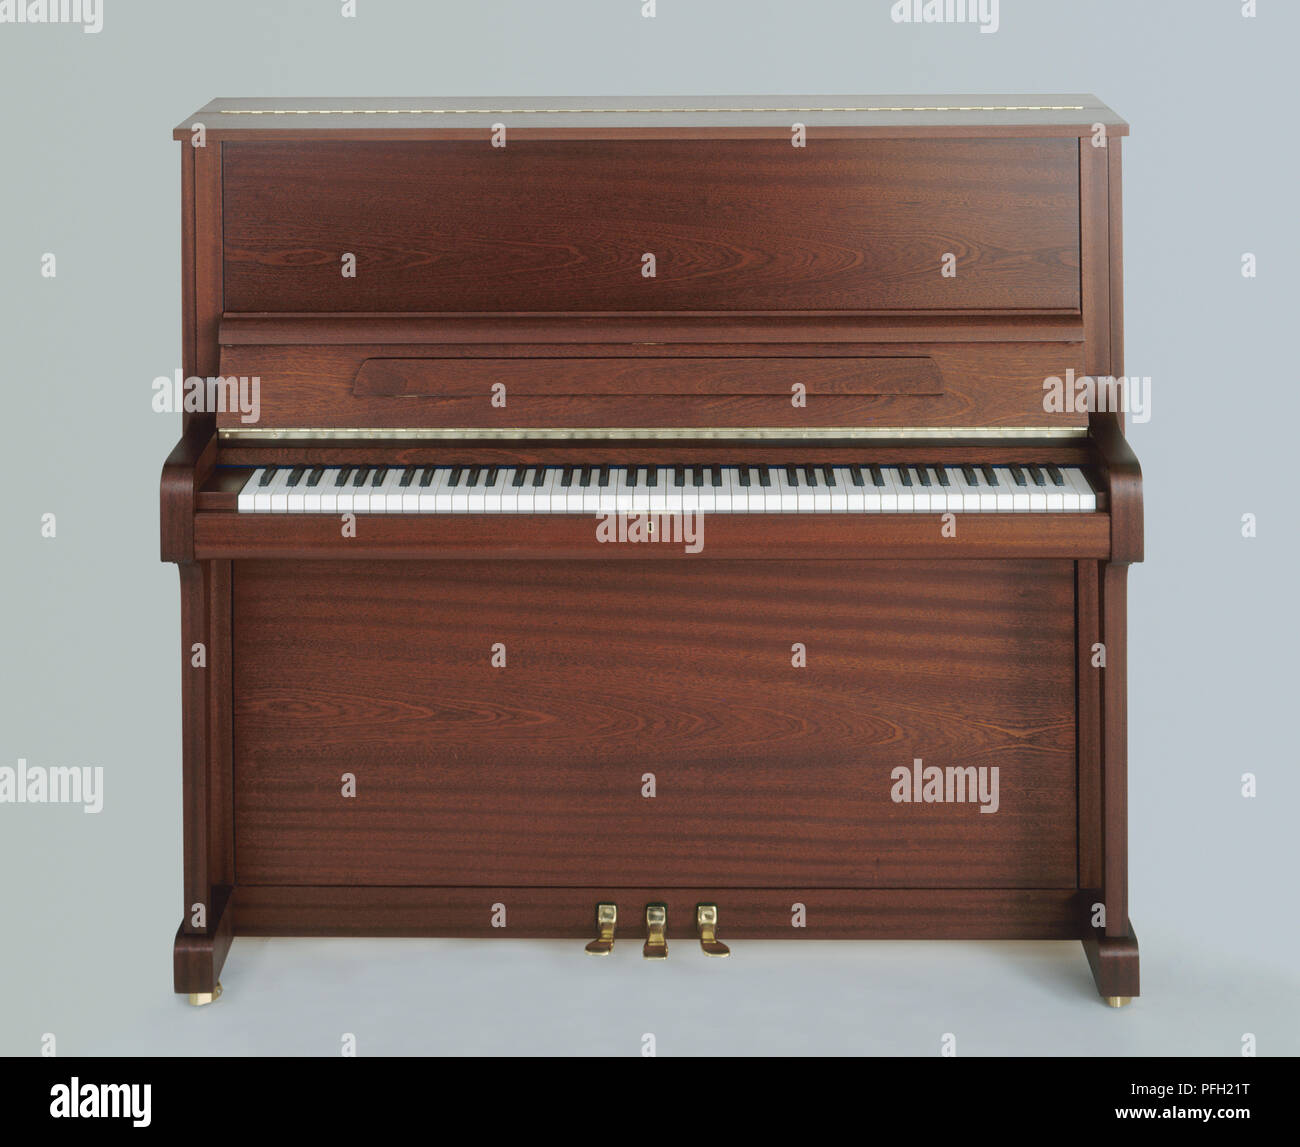 Upright piano, front view Stock Photo - Alamy